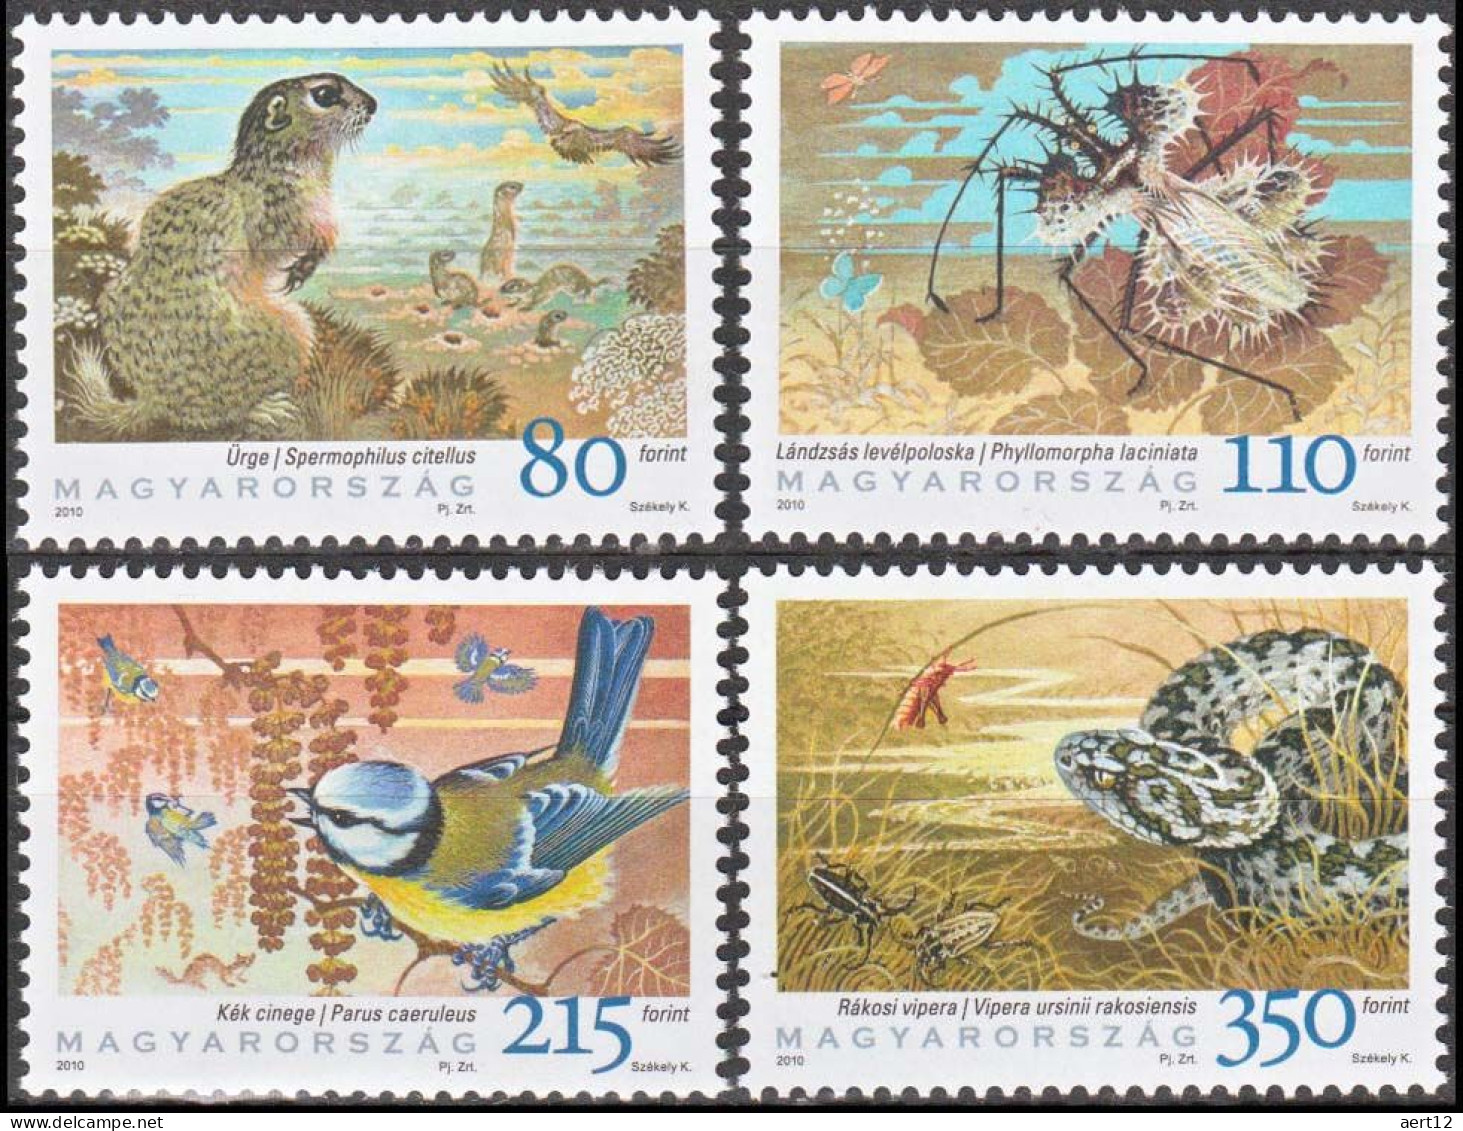 2010, Hungary, Biodiversity, Birds, Insects, Rodents, Snakes, Squirrels, 4 Stamps, MNH(**), HU 5473-76 - Snakes